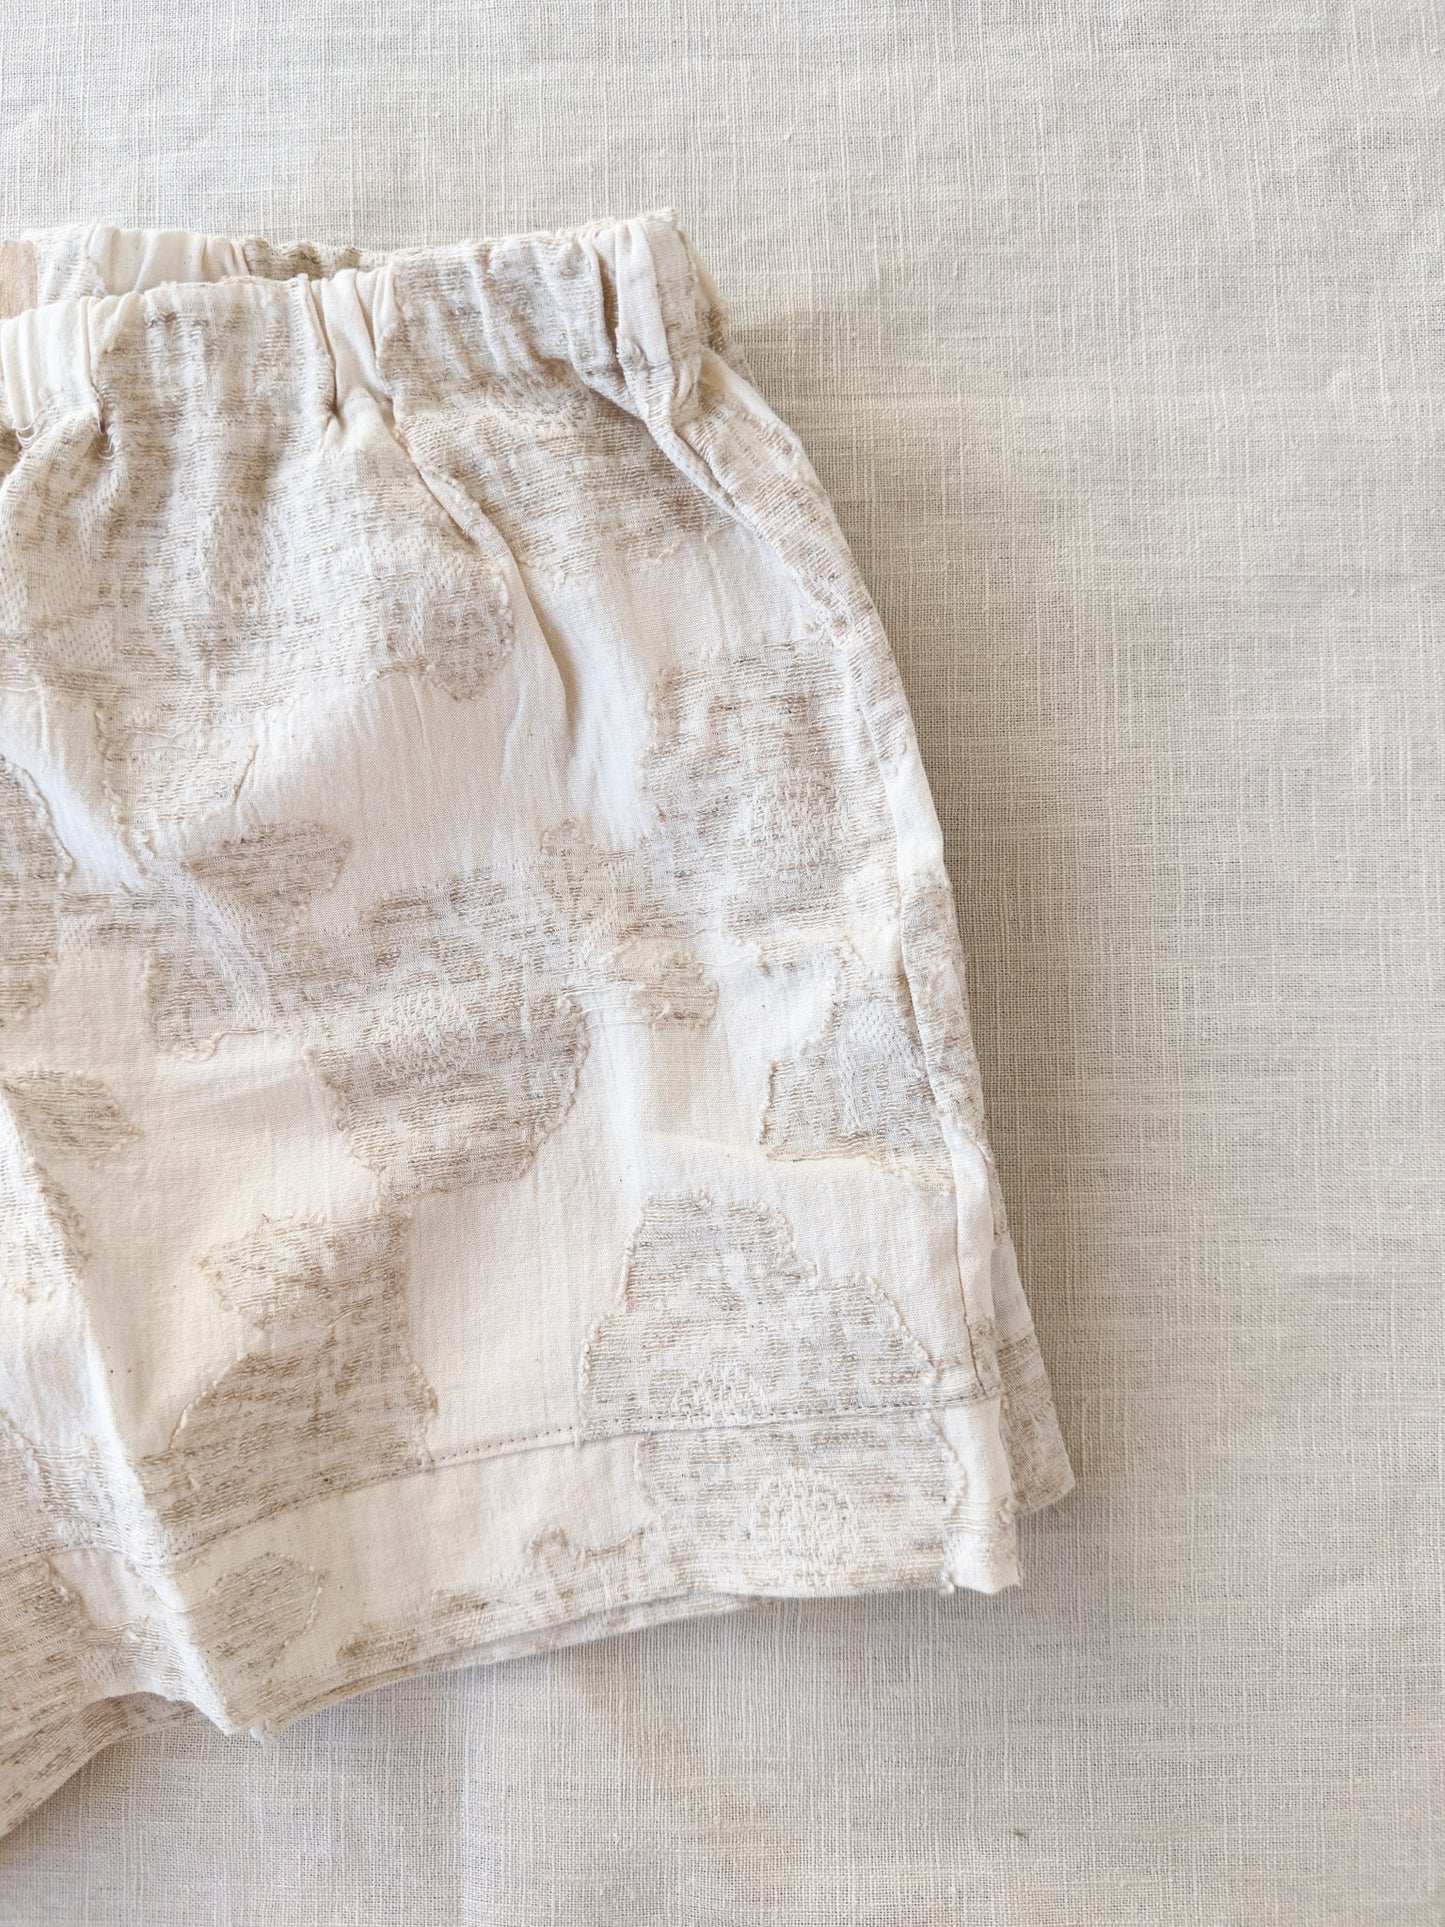 Load image into Gallery viewer, Loungewear shorts / cotton embroidery
